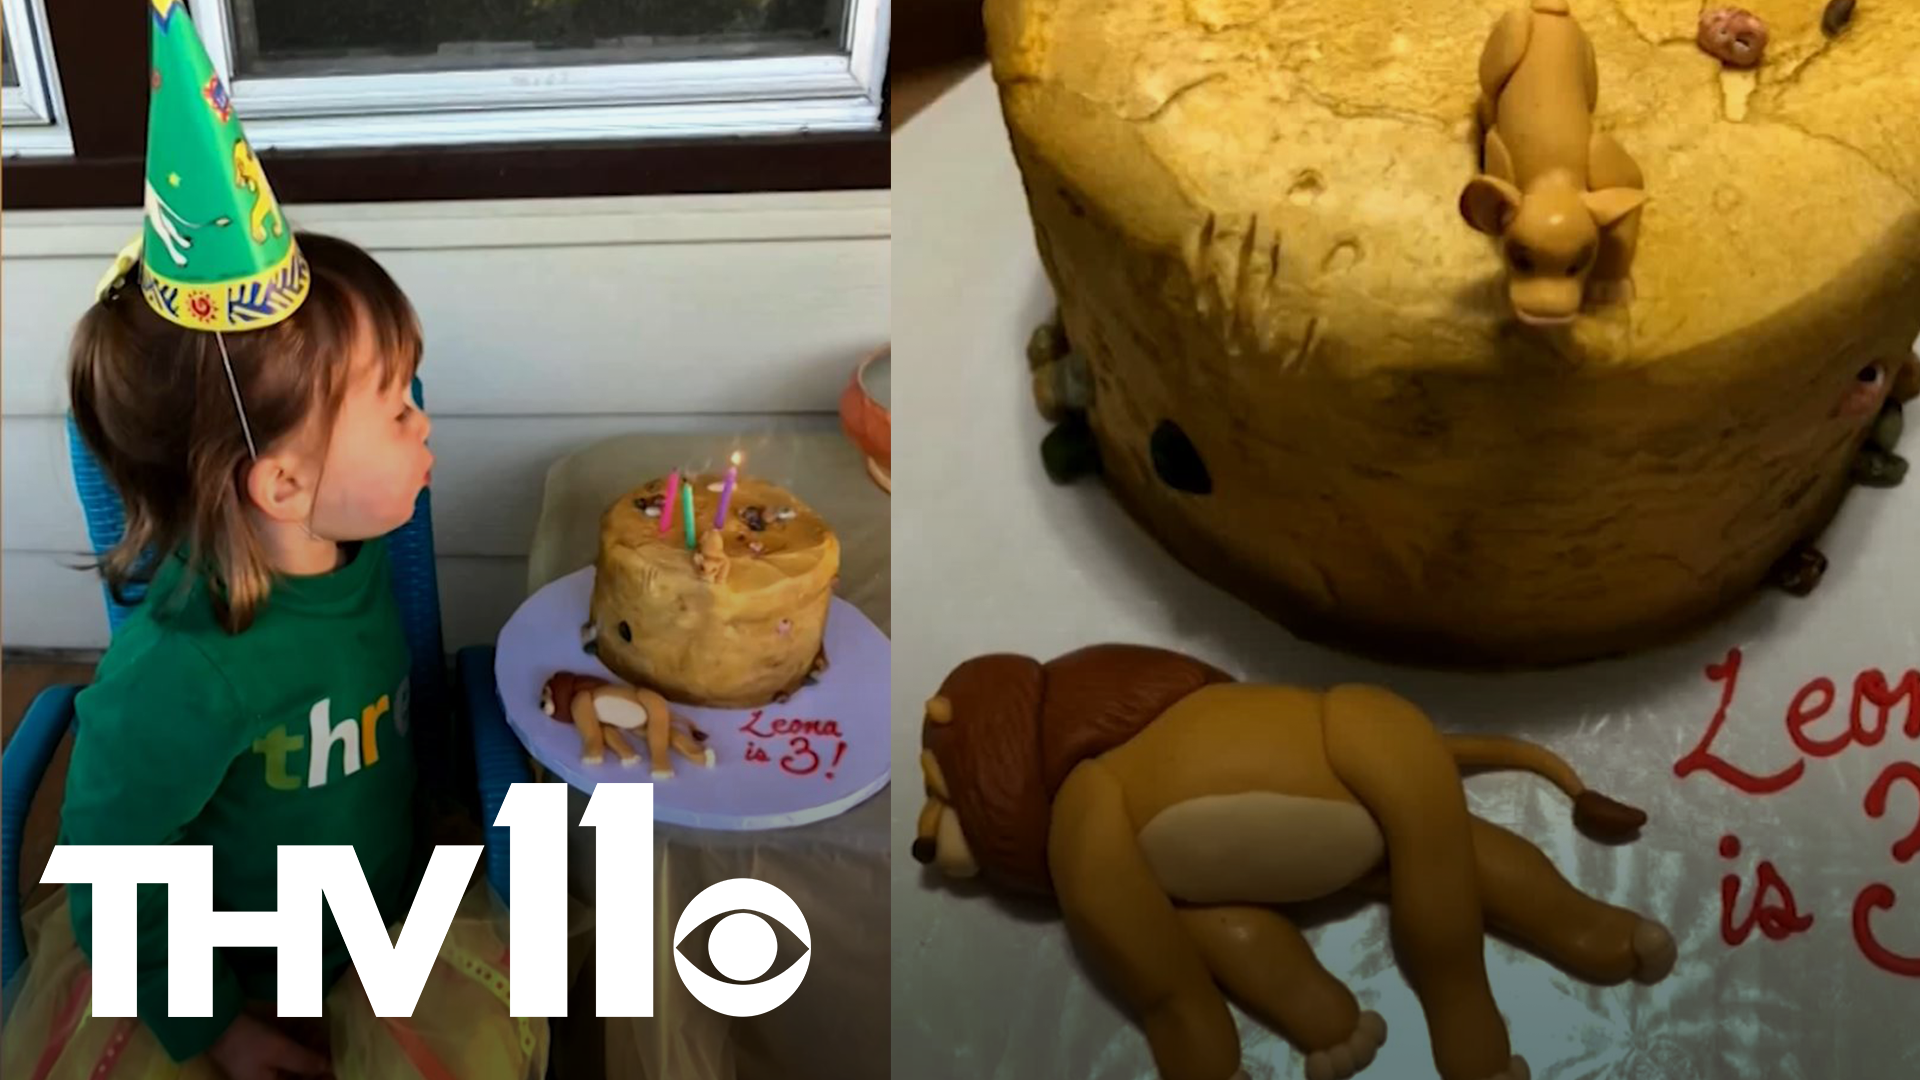 A three-year-old girl’s unusual birthday cake request has gone viral. Here’s a look at the Lion King-themed treat with a dark twist – and the funny reason behind it.